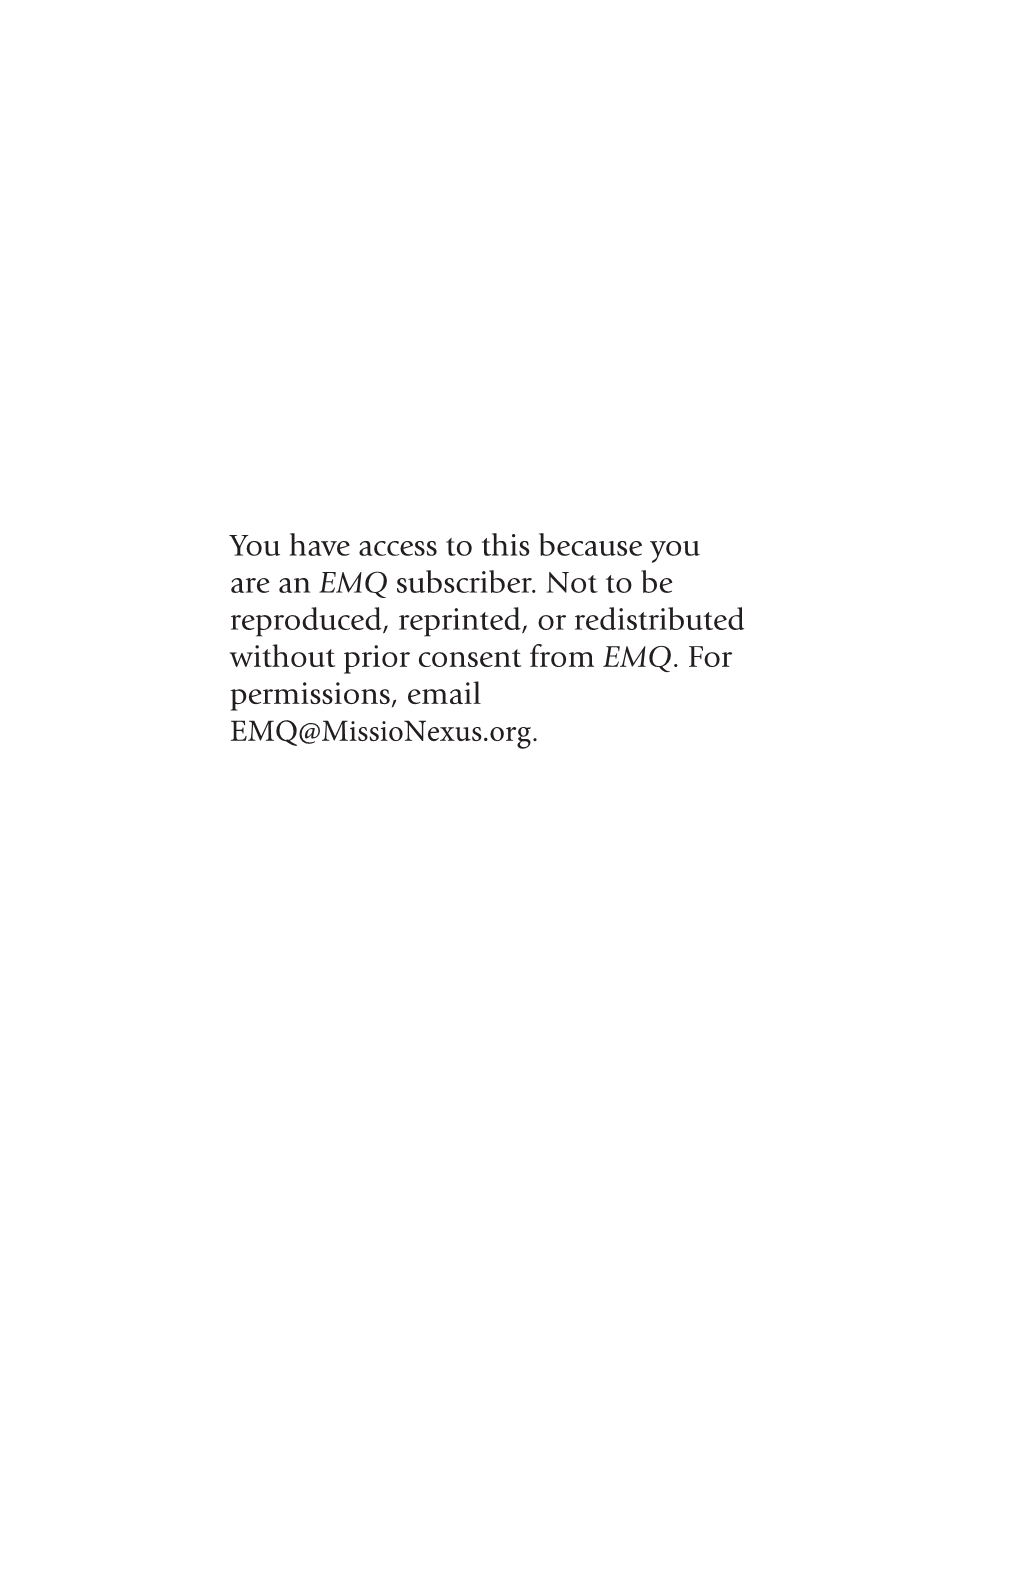 You Have Access to This Because You Are an EMQ Subscriber. Not to Be Reproduced, Reprinted, Or Redistributed Without Prior Consent from EMQ